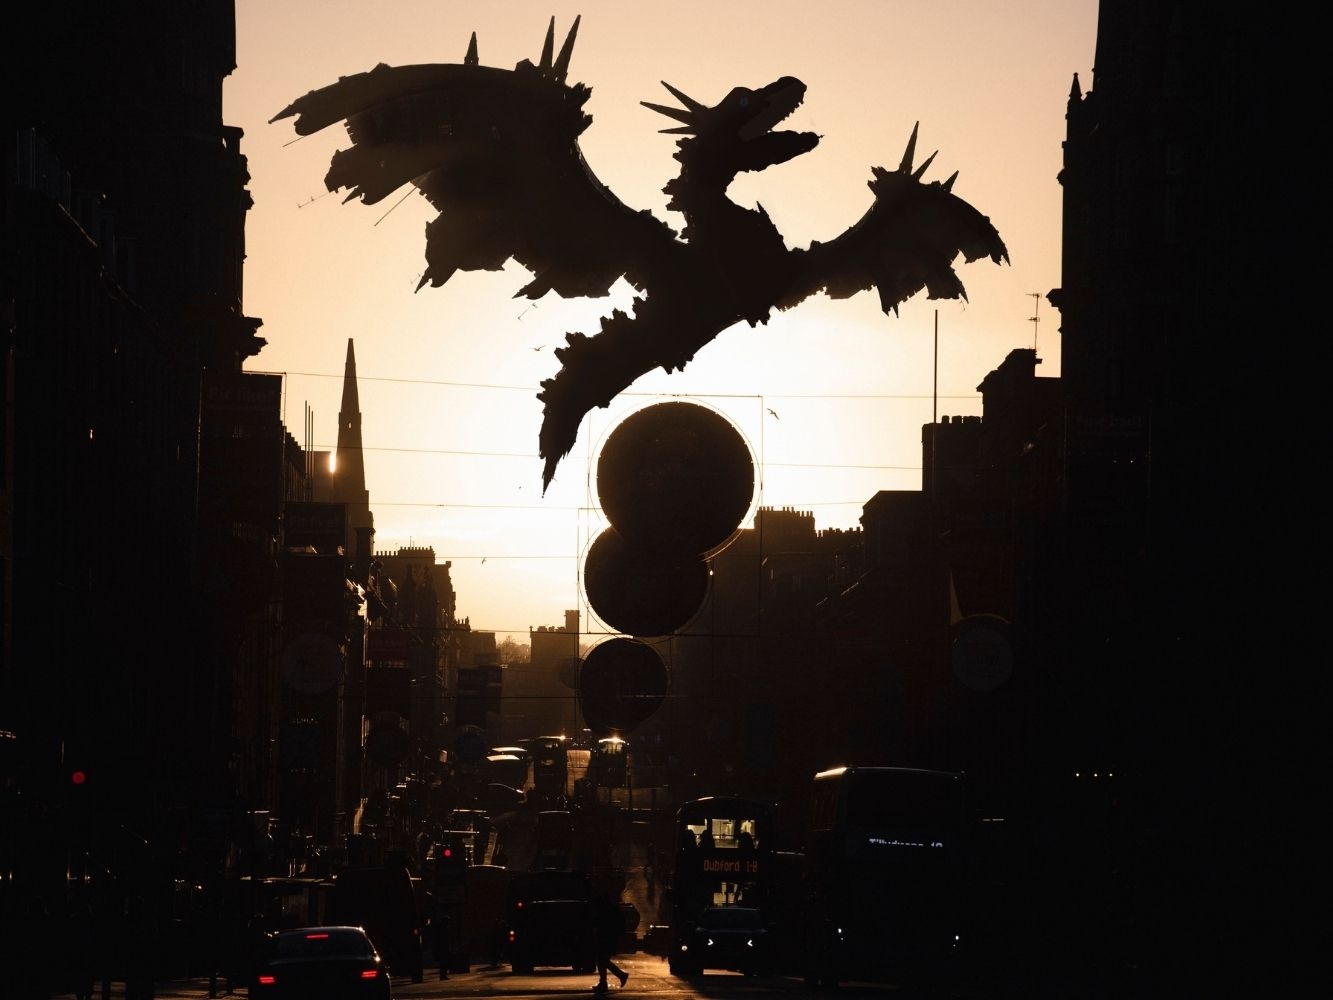 Photograph of Aberdeen's Union Street at sunset with a shadowed dragon in the skyline